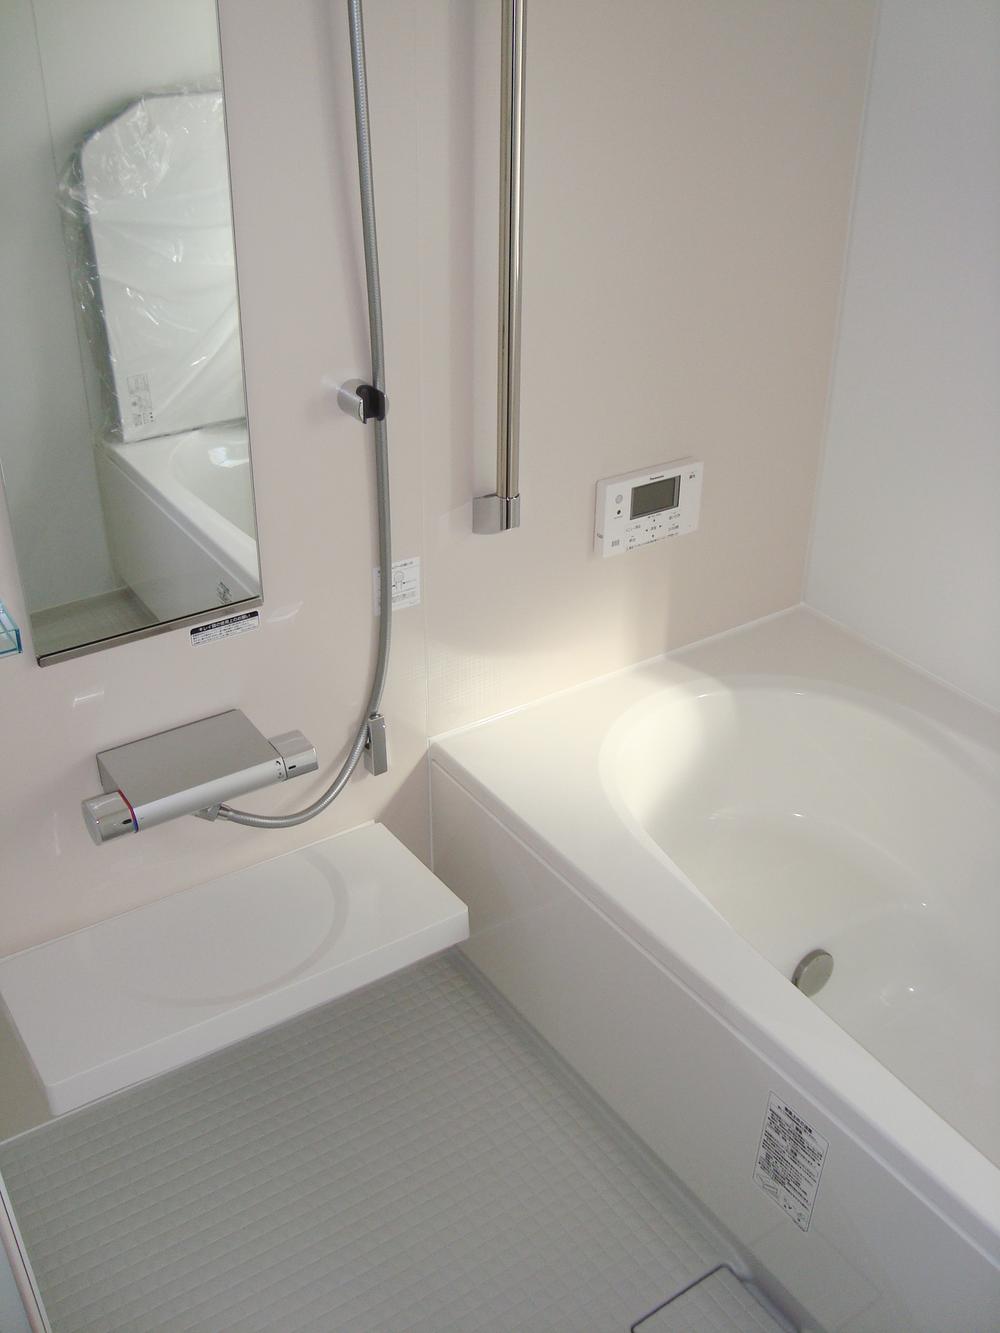 Bathroom. Bathroom spacious 1 pyeong size. The whole family in the firm energy saving in the bathtub of thermos effect that would enjoy the bath time